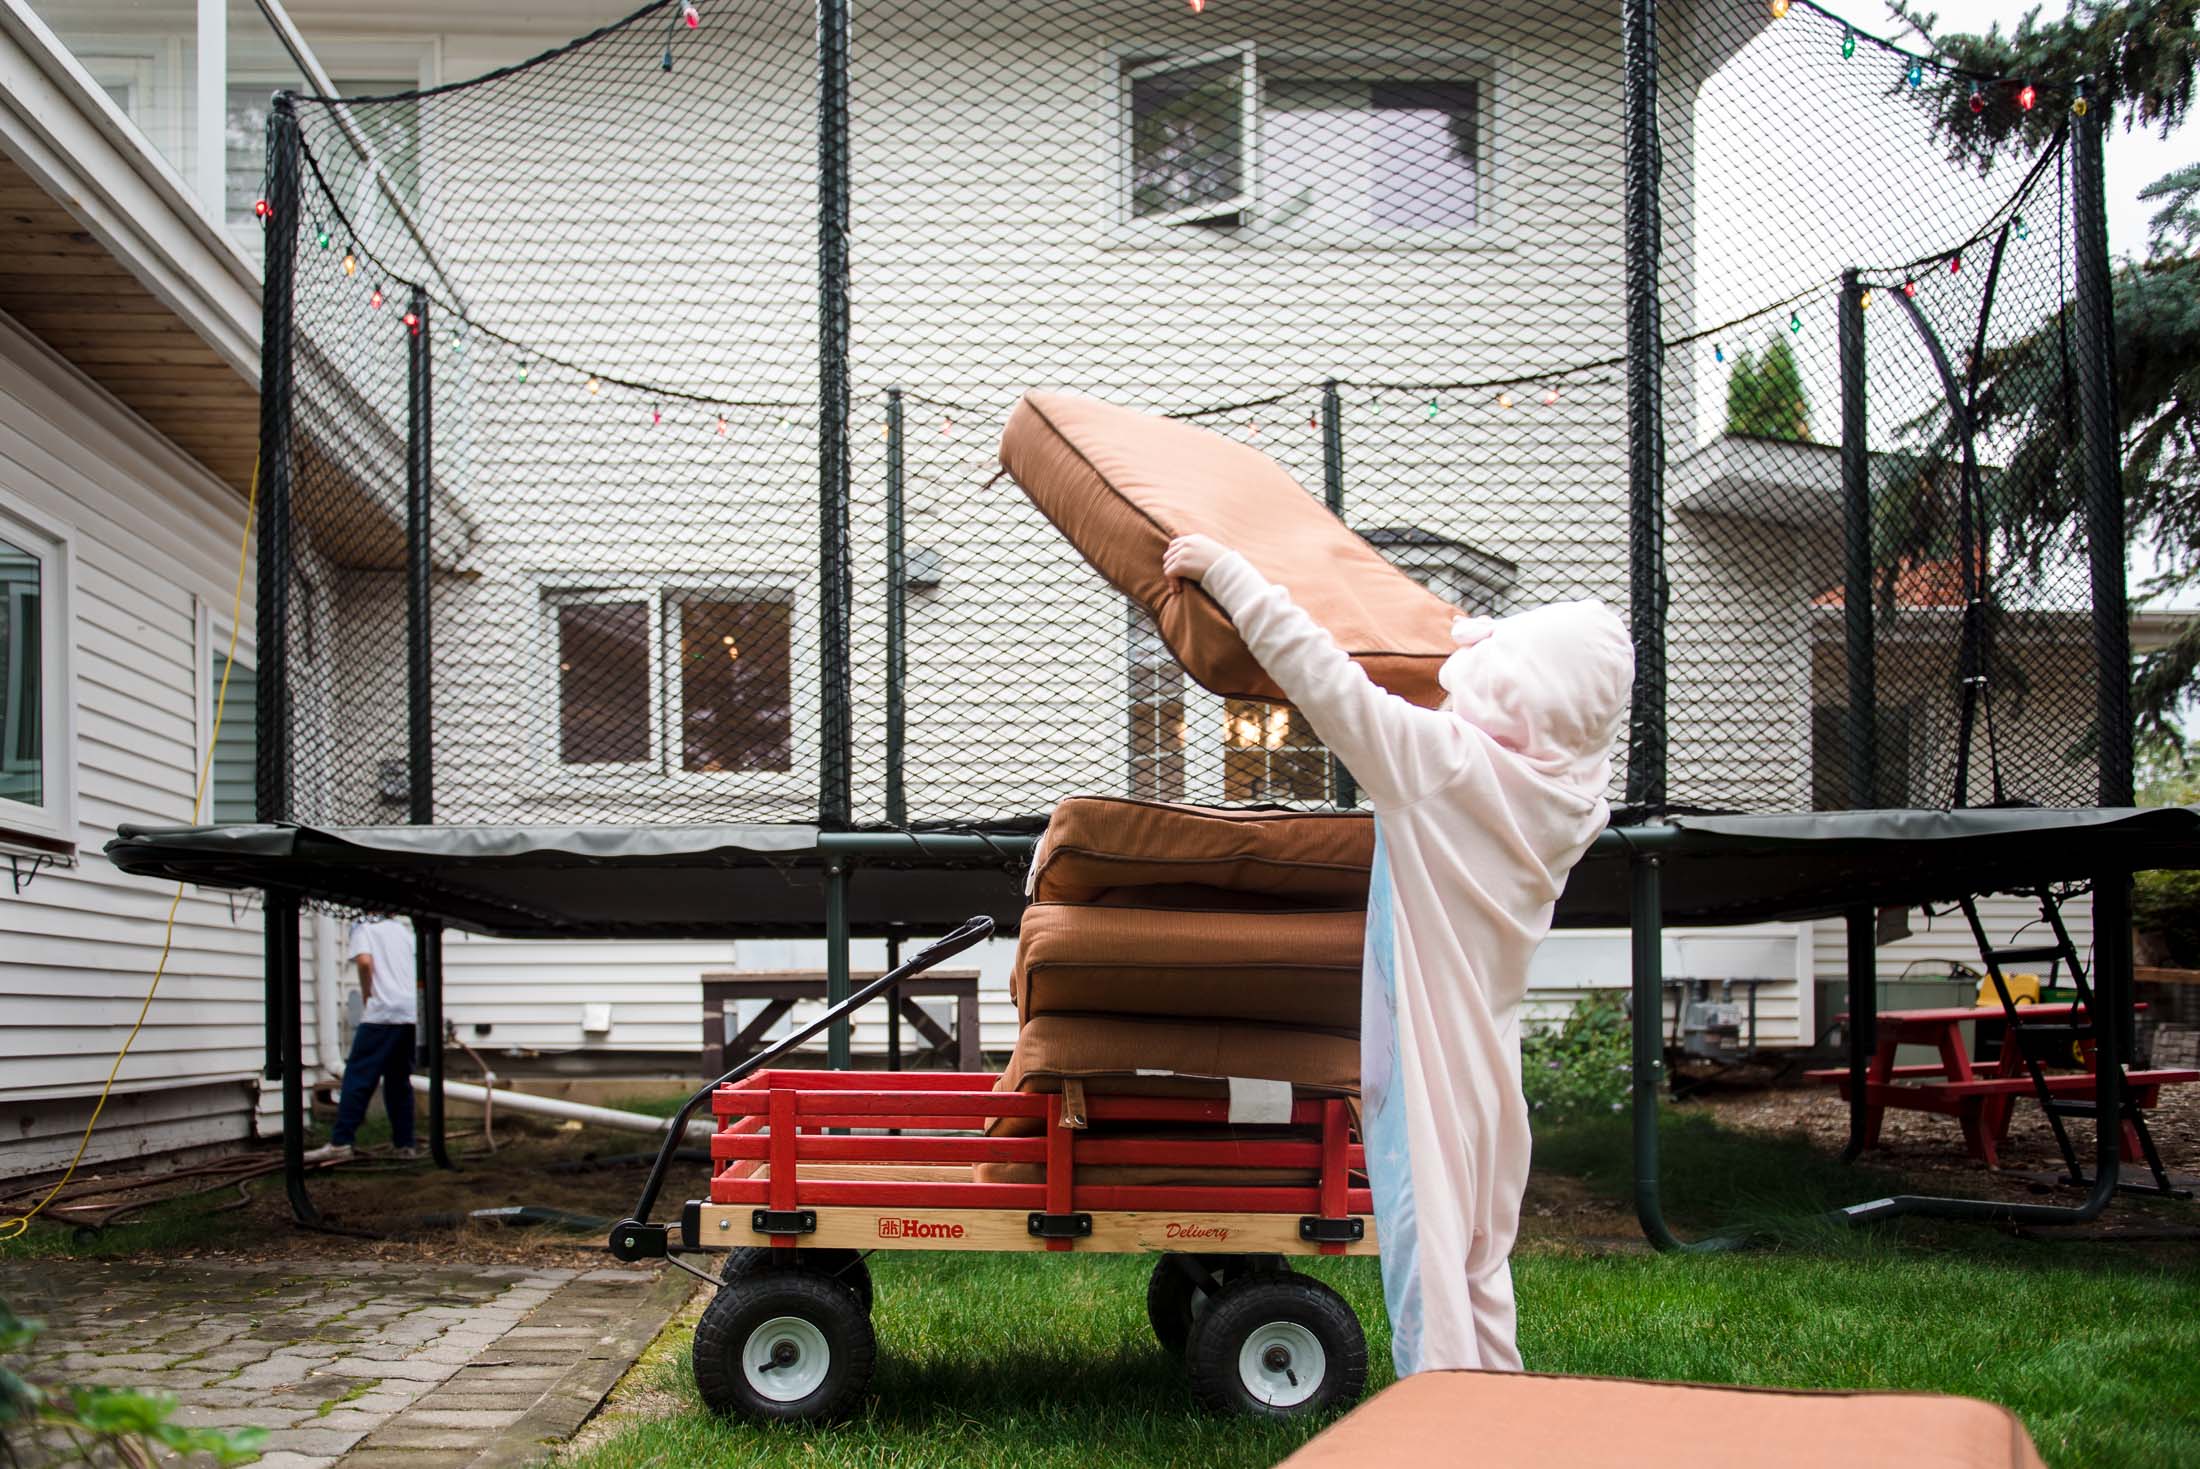 A girl stacks up cushions in her Edmonton backyard during a documentary family photo session